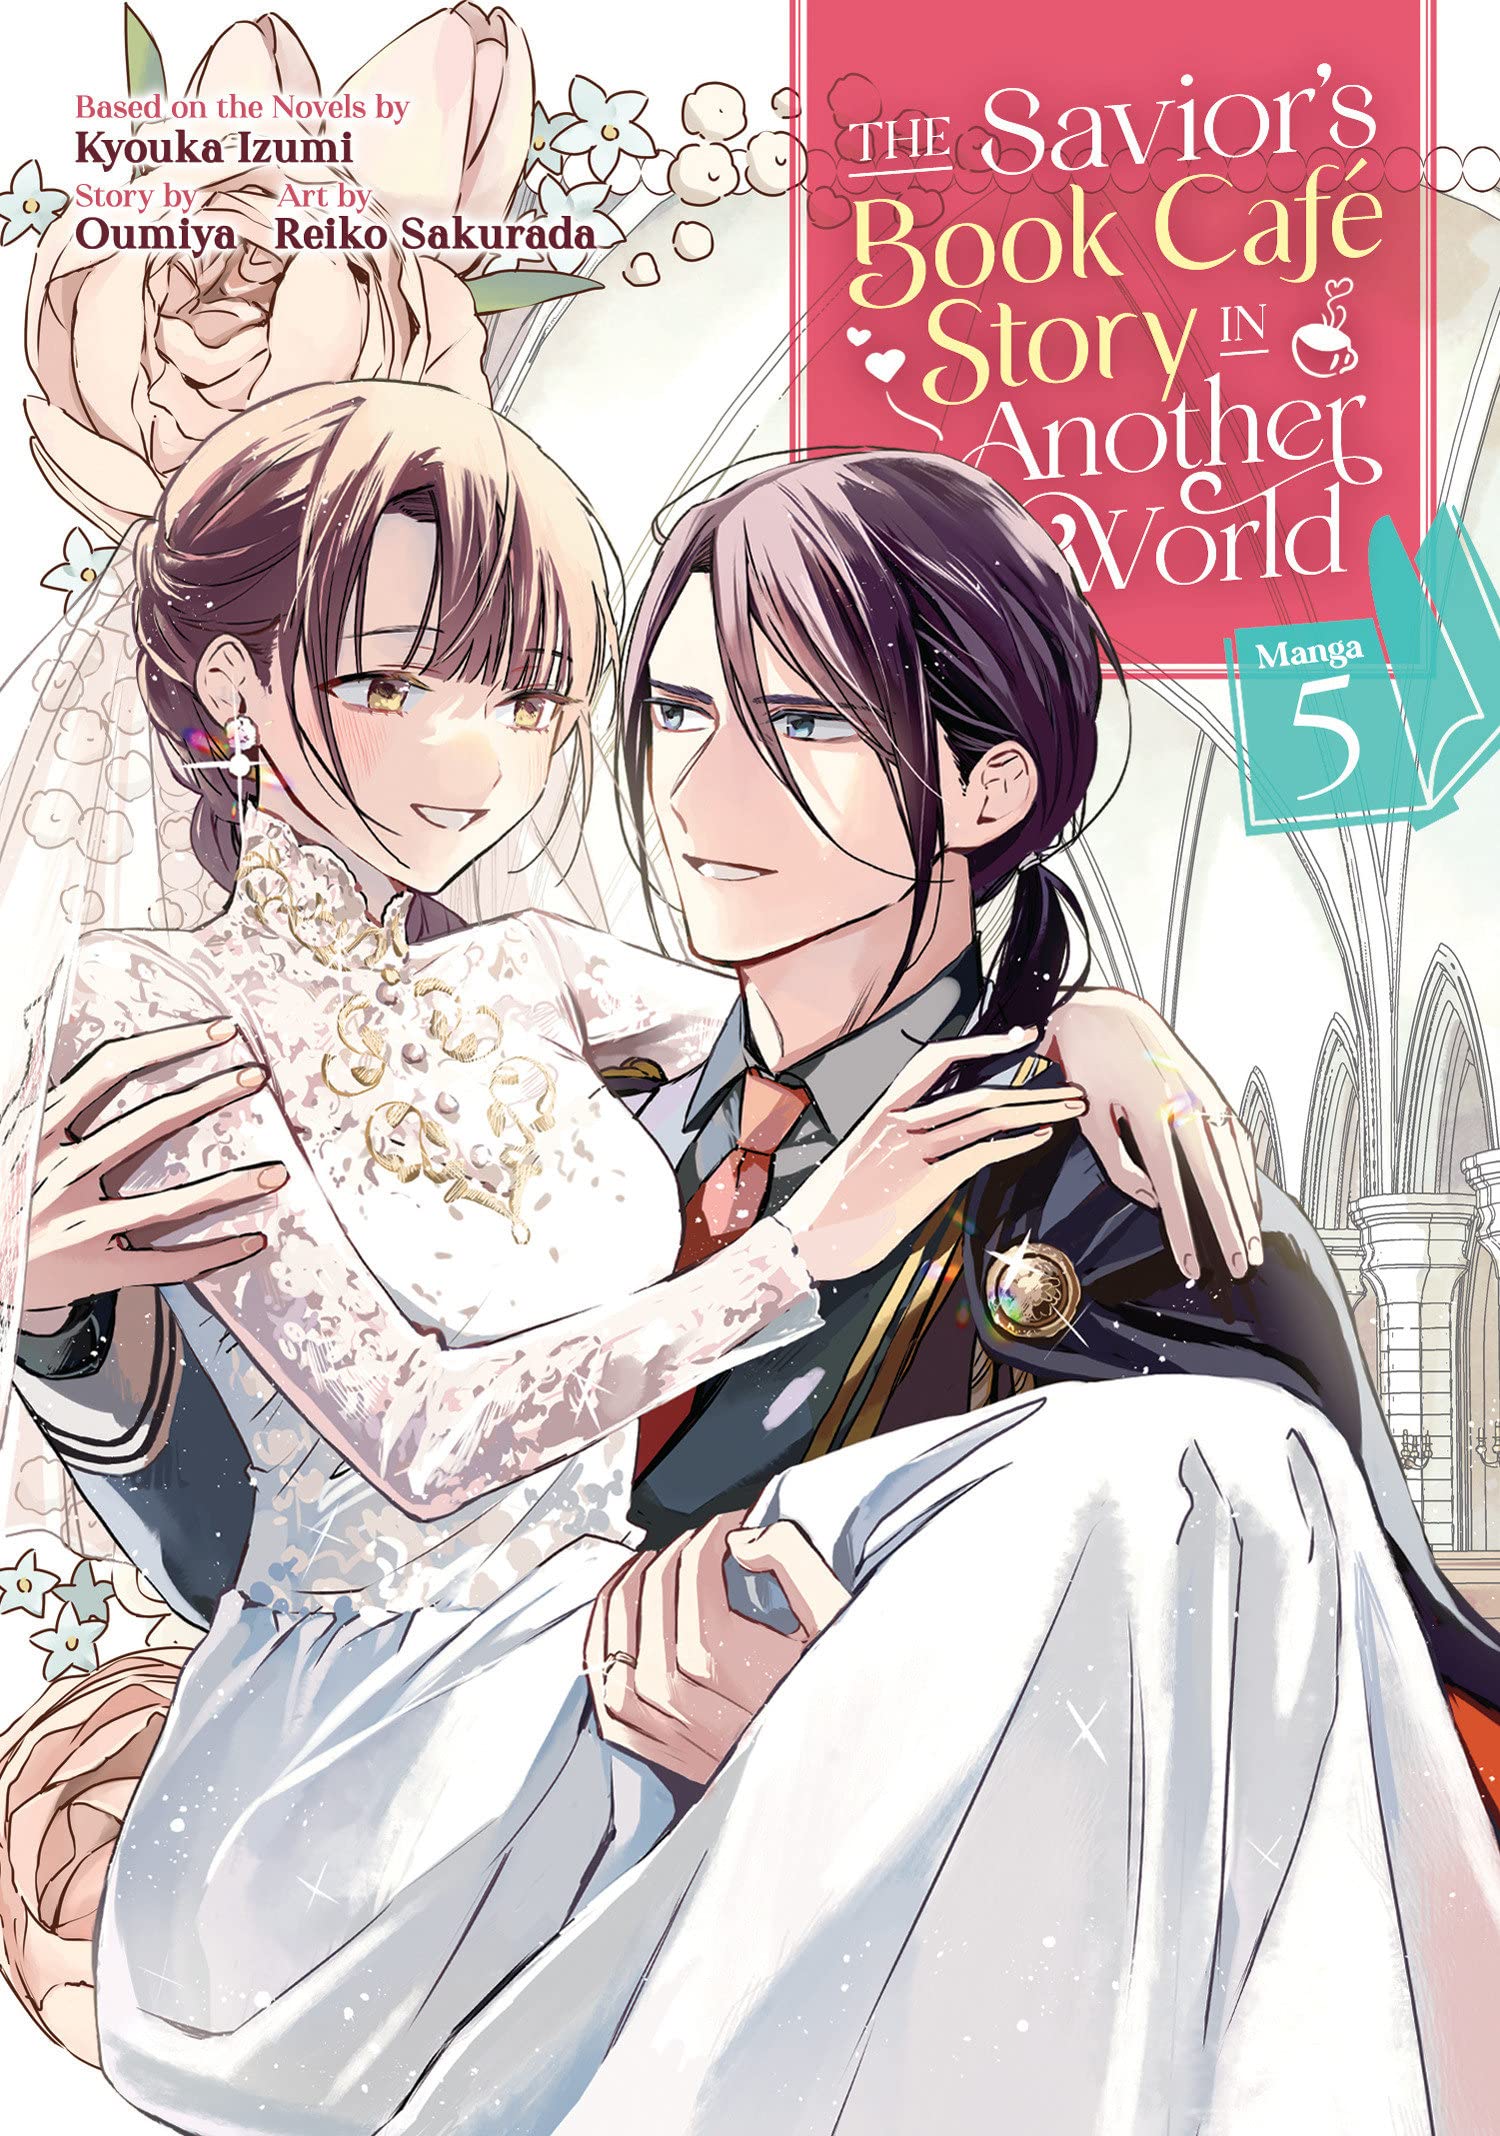 The Savior's Book Café Story in Another World (Manga) Vol. 05